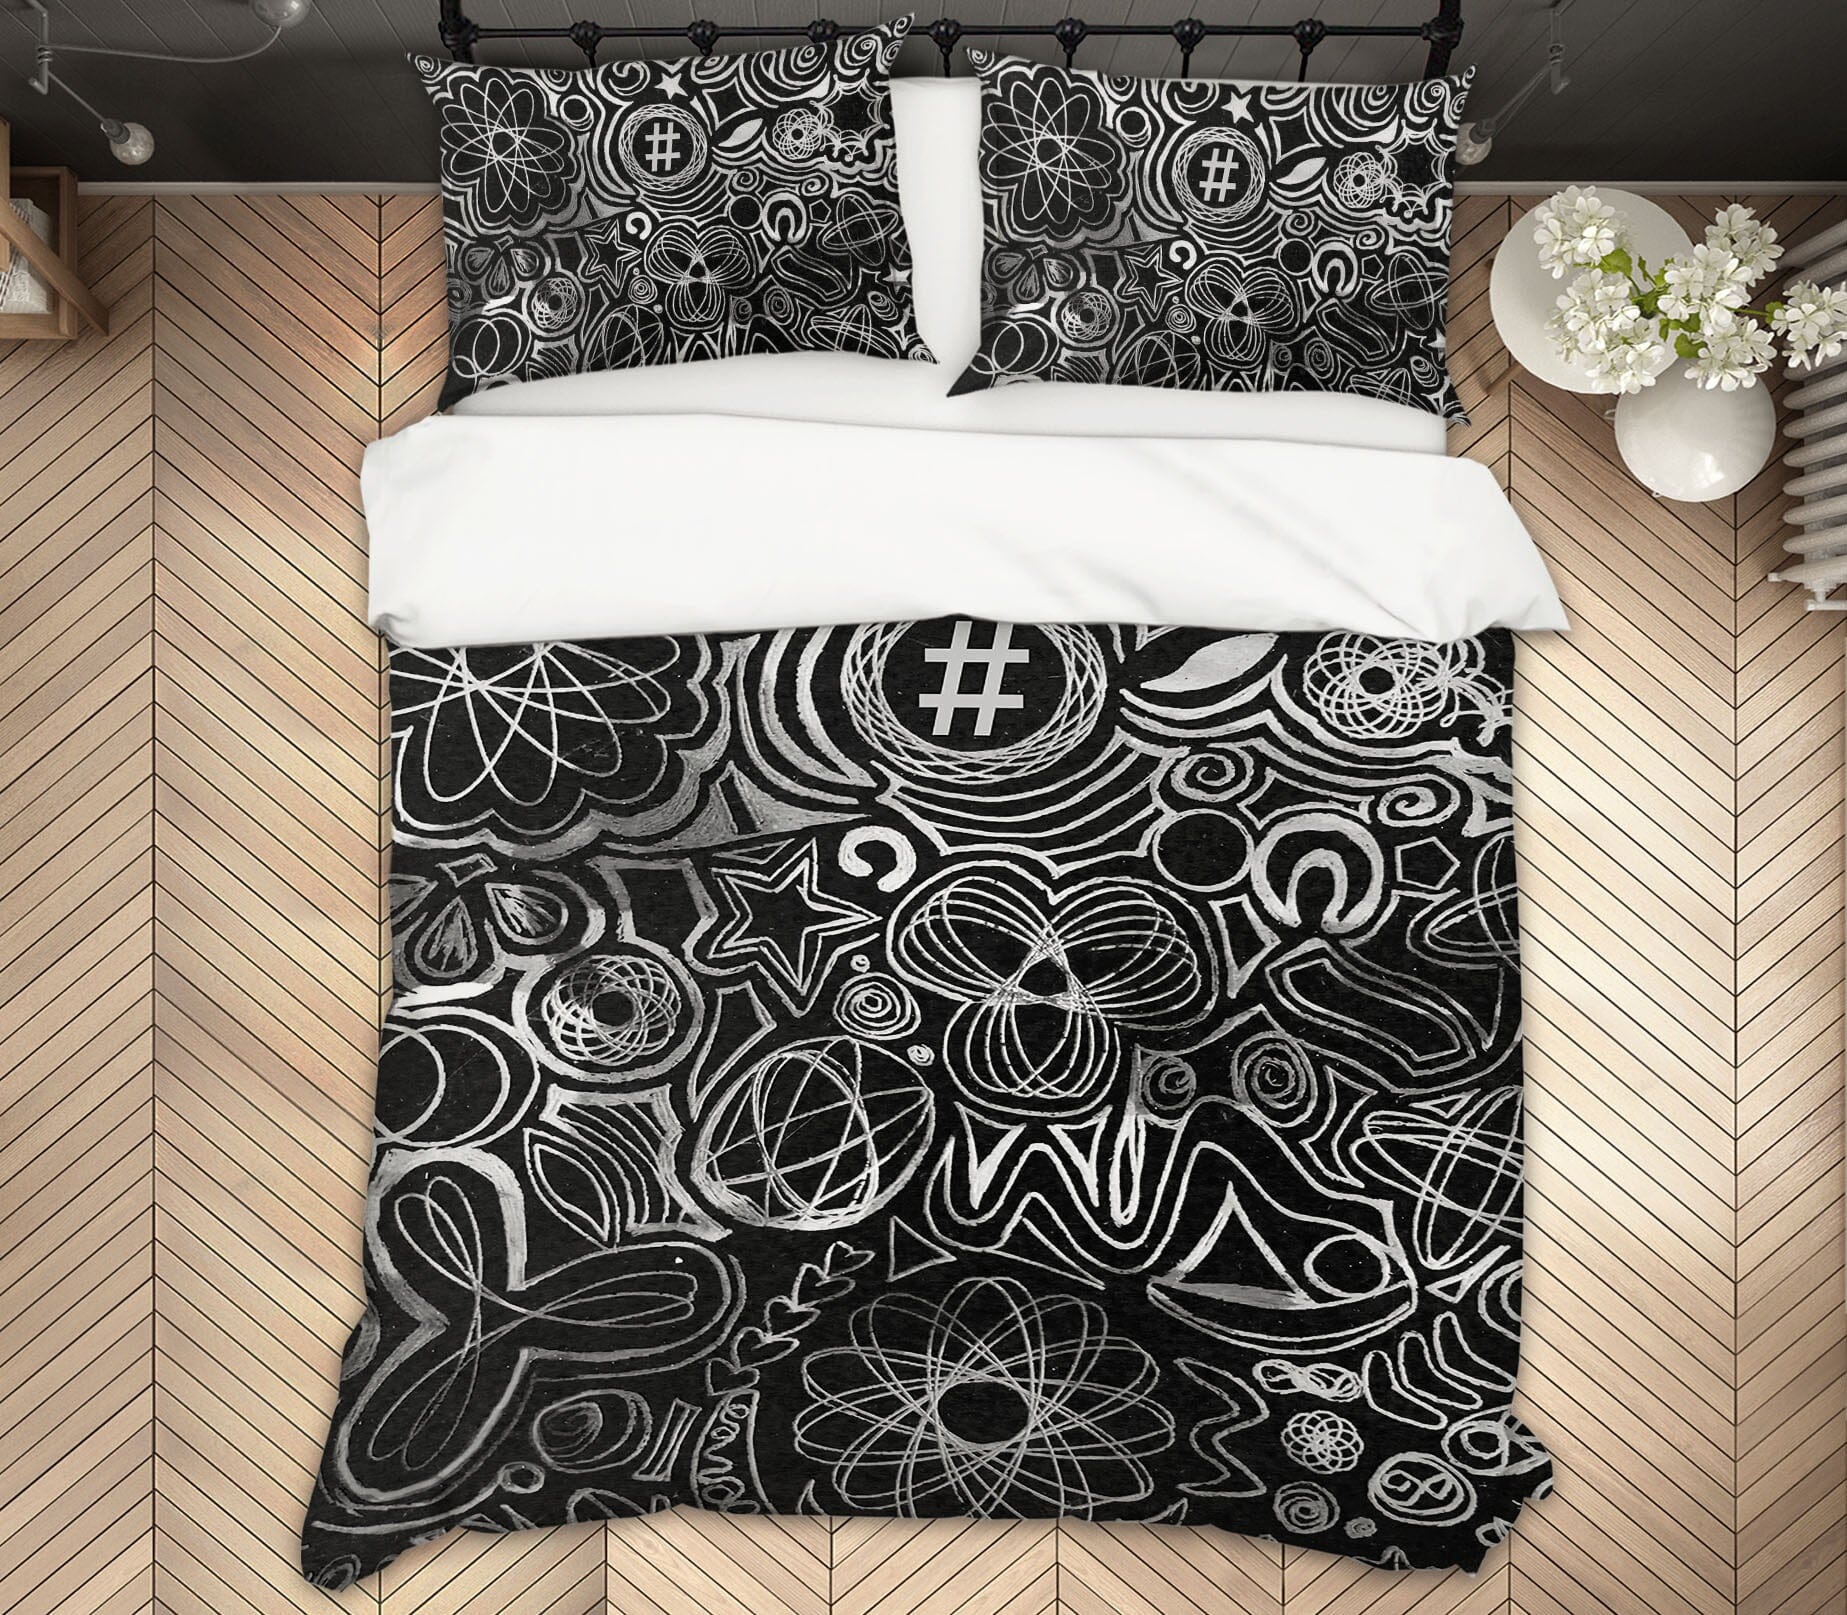 3D Line Pattern 2008 Shandra Smith Bedding Bed Pillowcases Quilt Quiet Covers AJ Creativity Home 